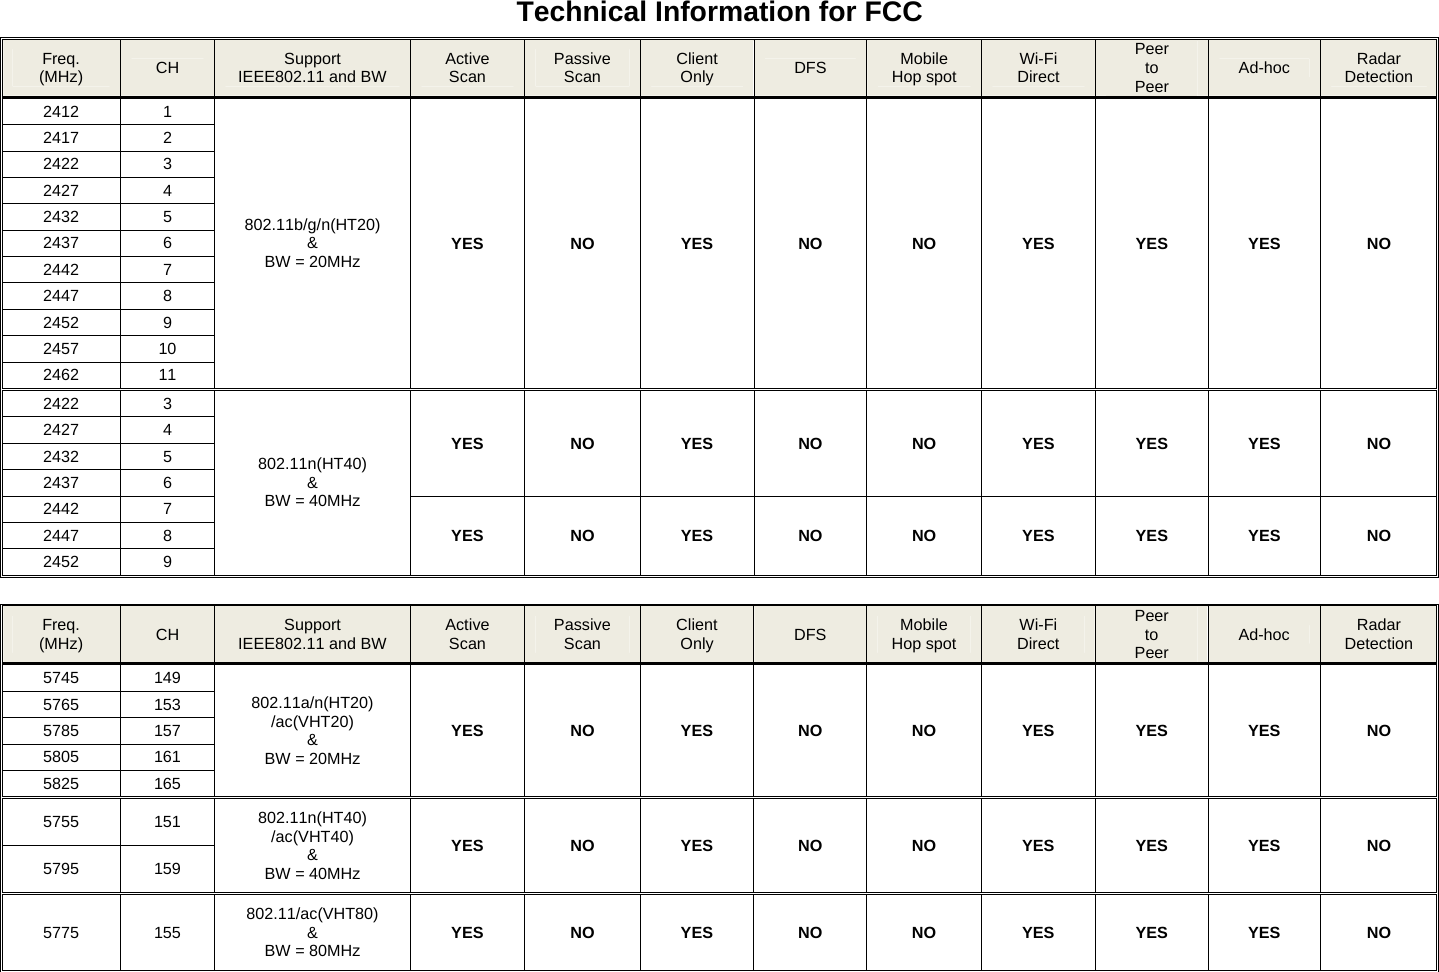 Technical Information for FCC     Freq. (MHz)  CH  Support IEEE802.11 and BW  Active Scan  Passive Scan  Client Only  DFS  Mobile Hop spot  Wi-Fi Direct Peer to Peer  Ad-hoc  Radar Detection 2412 1 802.11b/g/n(HT20) &amp; BW = 20MHz  YES NO YES NO NO YES YES YES NO 2417 2 2422 3 2427 4 2432 5 2437 6 2442 7 2447 8 2452 9 2457 10 2462 11 2422 3 802.11n(HT40) &amp; BW = 40MHz YES NO YES NO NO YES YES YES NO 2427 4 2432 5 2437 6 2442 7 YES NO YES NO NO YES YES YES NO 2447 8 2452 9    Freq. (MHz)  CH  Support IEEE802.11 and BW  Active Scan  Passive Scan  Client Only  DFS  Mobile Hop spot  Wi-Fi Direct Peer to Peer  Ad-hoc  Radar Detection 5745 149 802.11a/n(HT20) /ac(VHT20) &amp; BW = 20MHz YES NO YES NO NO YES YES YES NO 5765 153 5785 157 5805 161 5825 165 5755 151 802.11n(HT40) /ac(VHT40) &amp; BW = 40MHz YES NO YES NO NO YES YES YES NO 5795 159 5775 155 802.11/ac(VHT80) &amp; BW = 80MHz  YES NO YES NO NO YES YES YES NO  